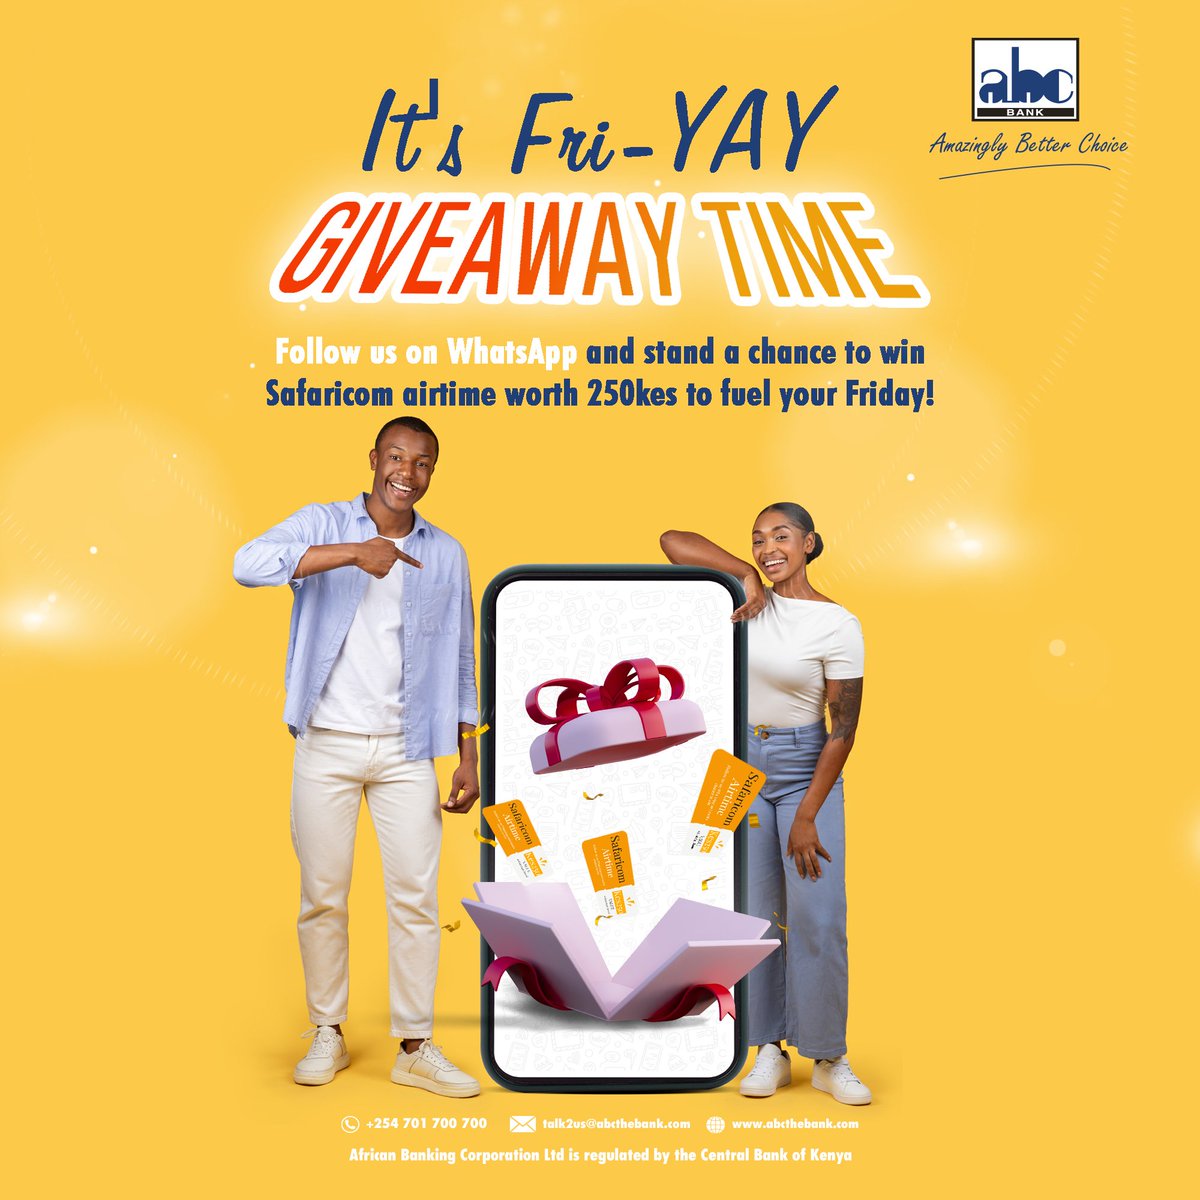 📲 Follow us on WhatsApp and stand a chance to win airtime worth 250kes to fuel your Friday! 🌟 Don't miss out on the chance to stay connected with exclusive updates, financial tips, and more! Plus, who doesn't love a little extra credit? 📞 Spread the word and let's make this